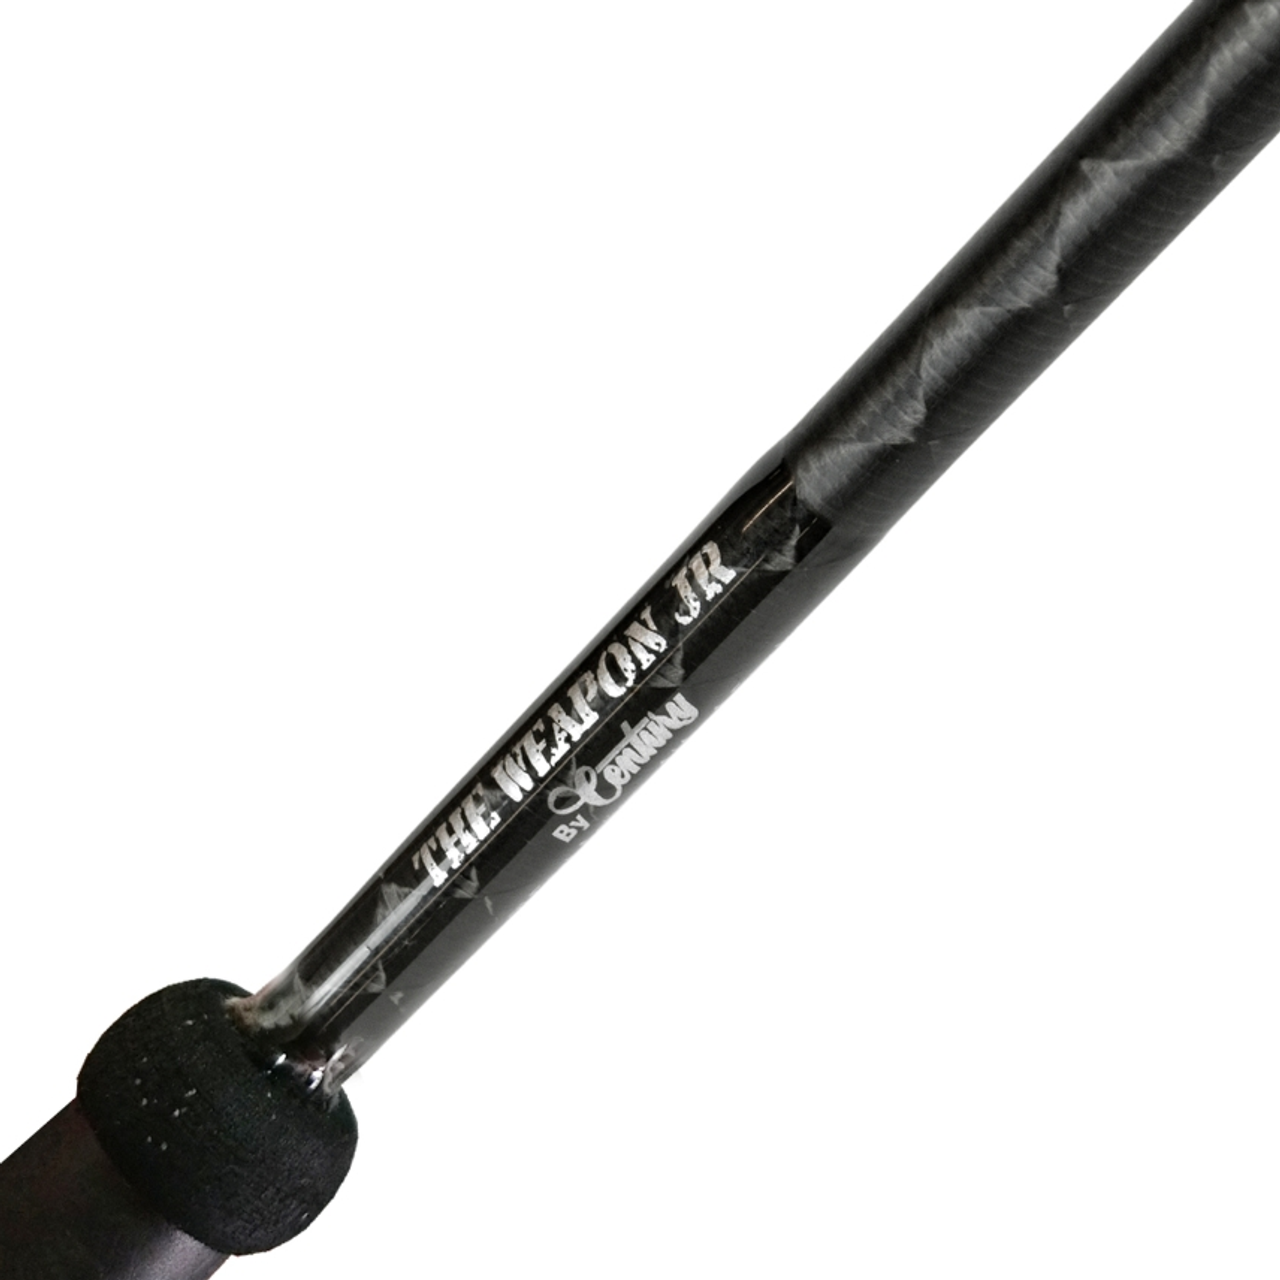 Century Rods The Weapon Jr. Spinning Rods